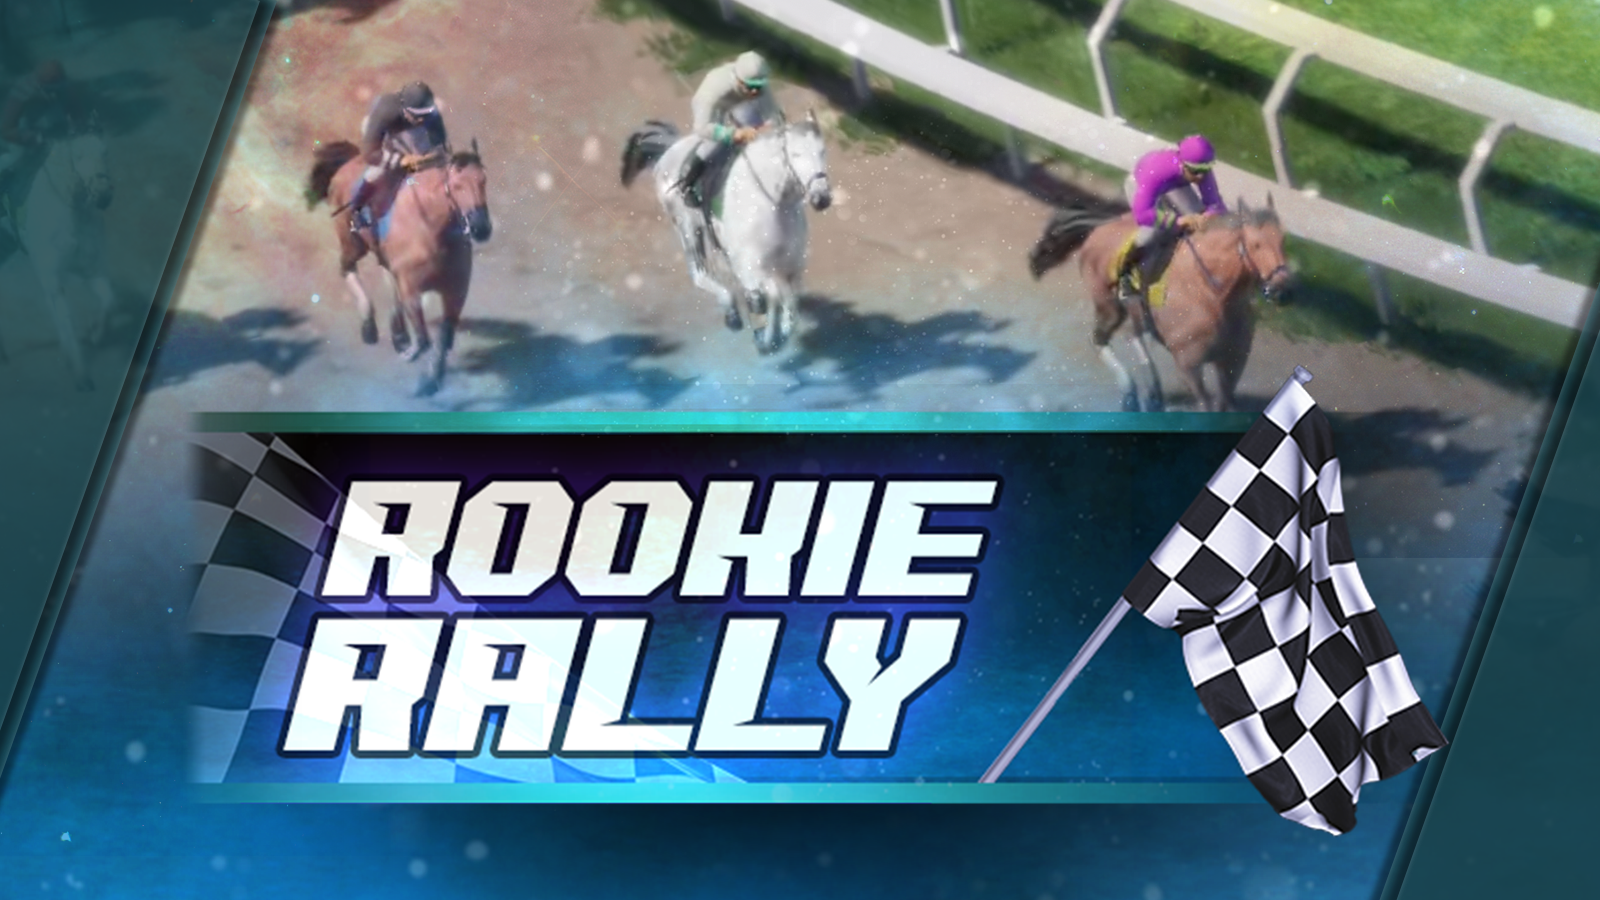 How to Register for the Rookie Rally Series